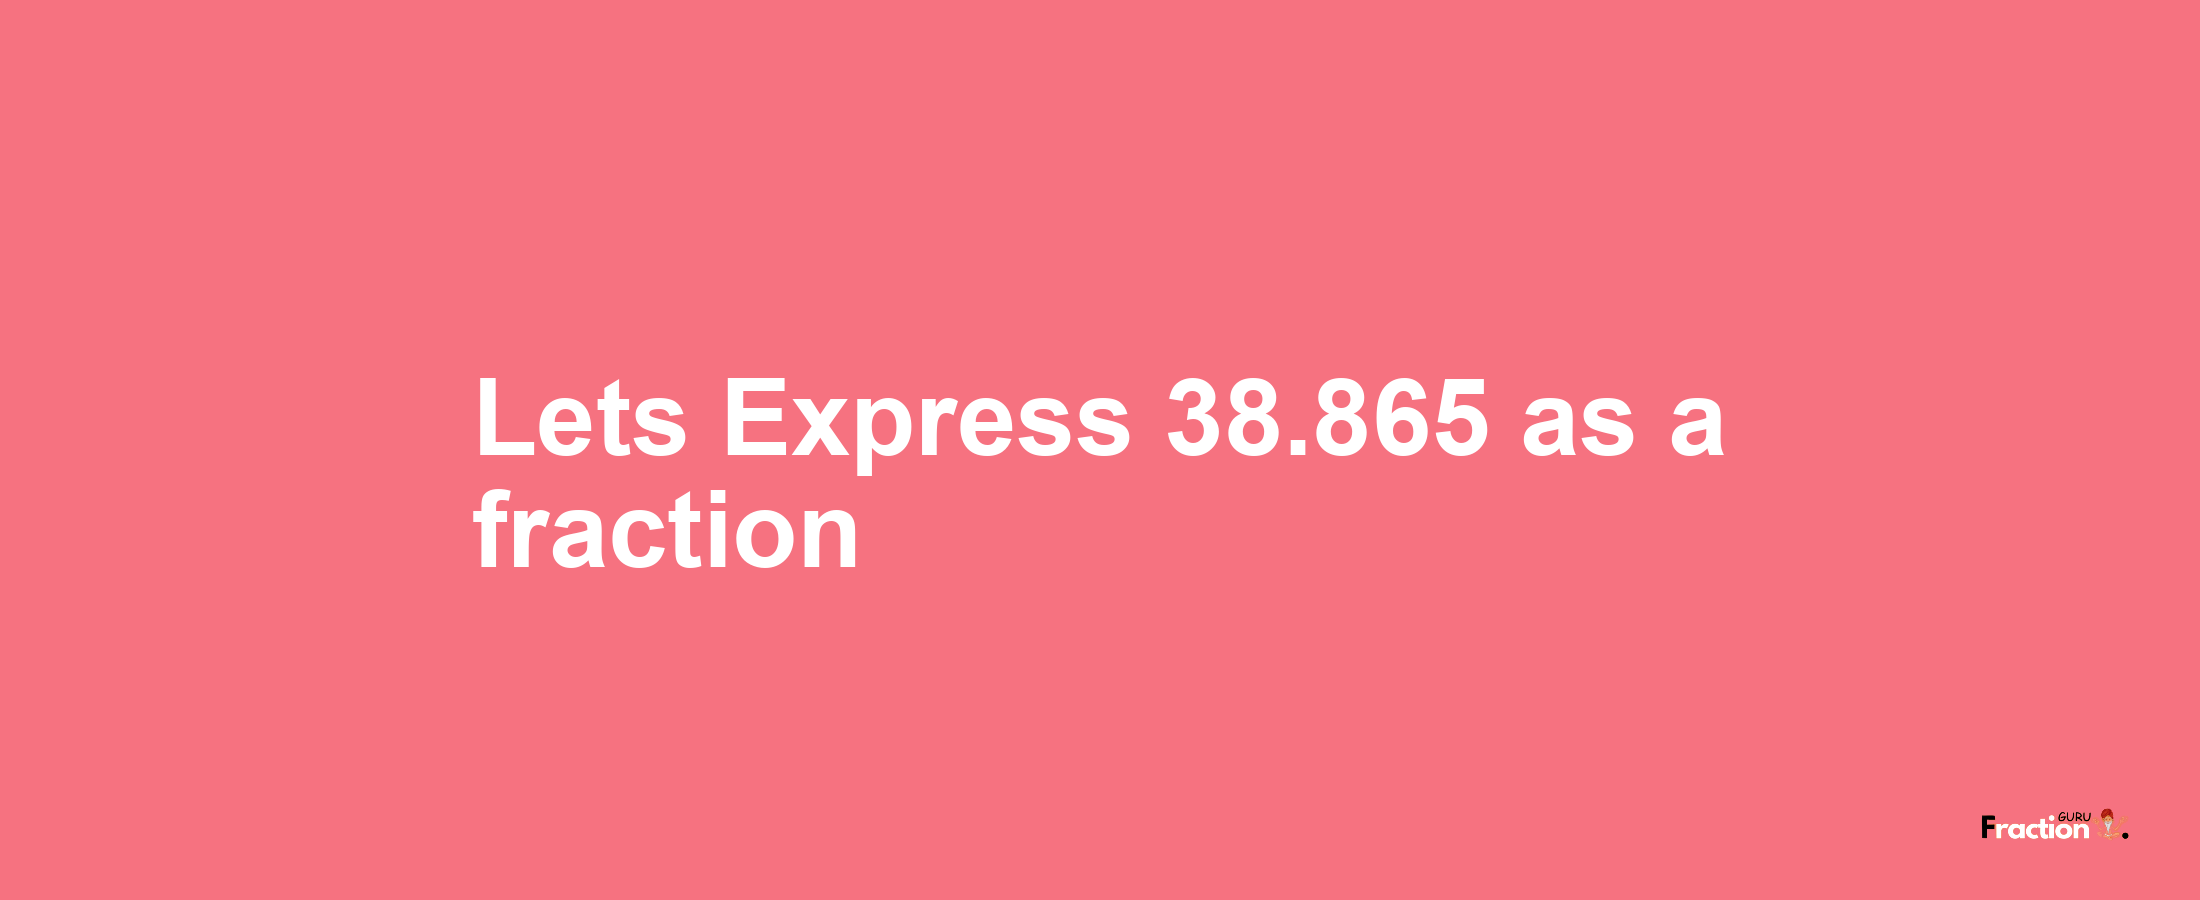 Lets Express 38.865 as afraction